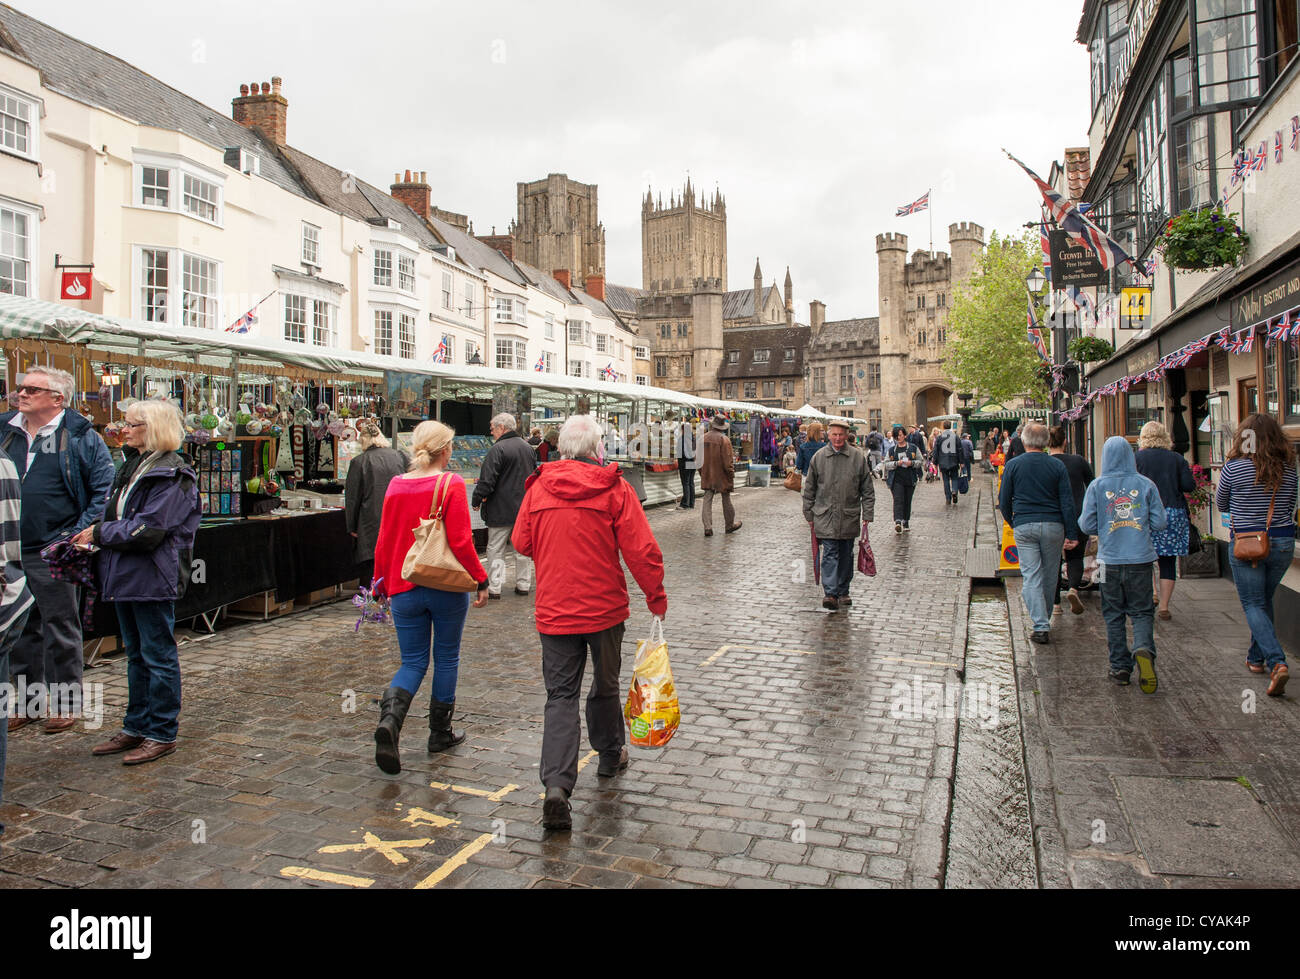 WELLS, UK - a street market in the Market Place in the center of Wells, Somerset, near Wells Cathedral (visible in the background). Stock Photo